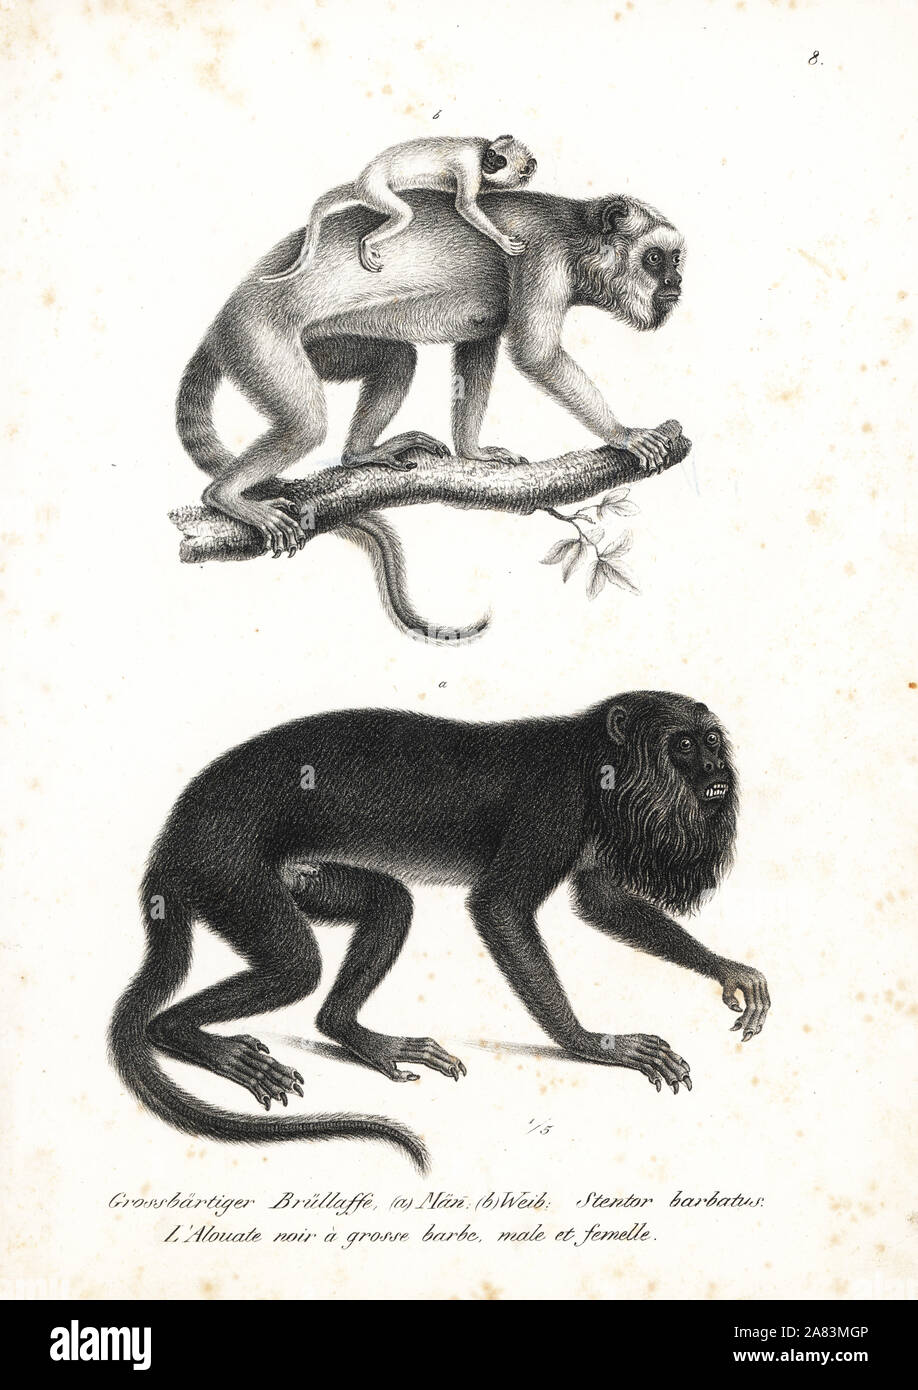 Black howler, Alouatta caraya (Stentor barbatus), male and female. Lithograph by Karl Joseph Brodtmann from Heinrich Rudolf Schinz's Illustrated Natural History of Animals, Zurich, 1827. Stock Photo